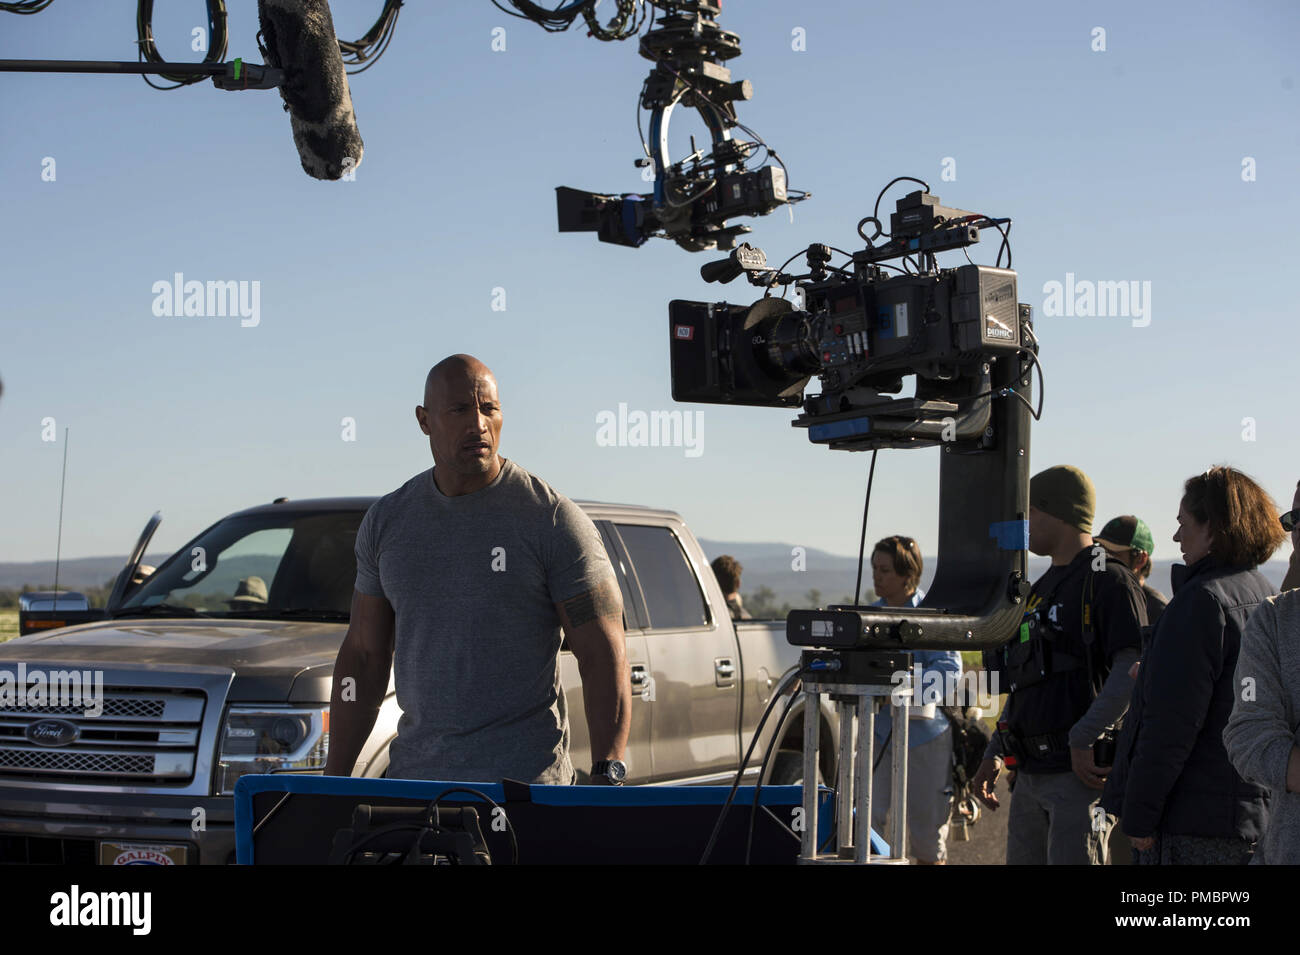 Dwayne Johnson on the set of the action thriller 'SAN ANDREAS,' a production of New Line Cinema and Village Roadshow Pictures, released by Warner Bros. Pictures. Stock Photo